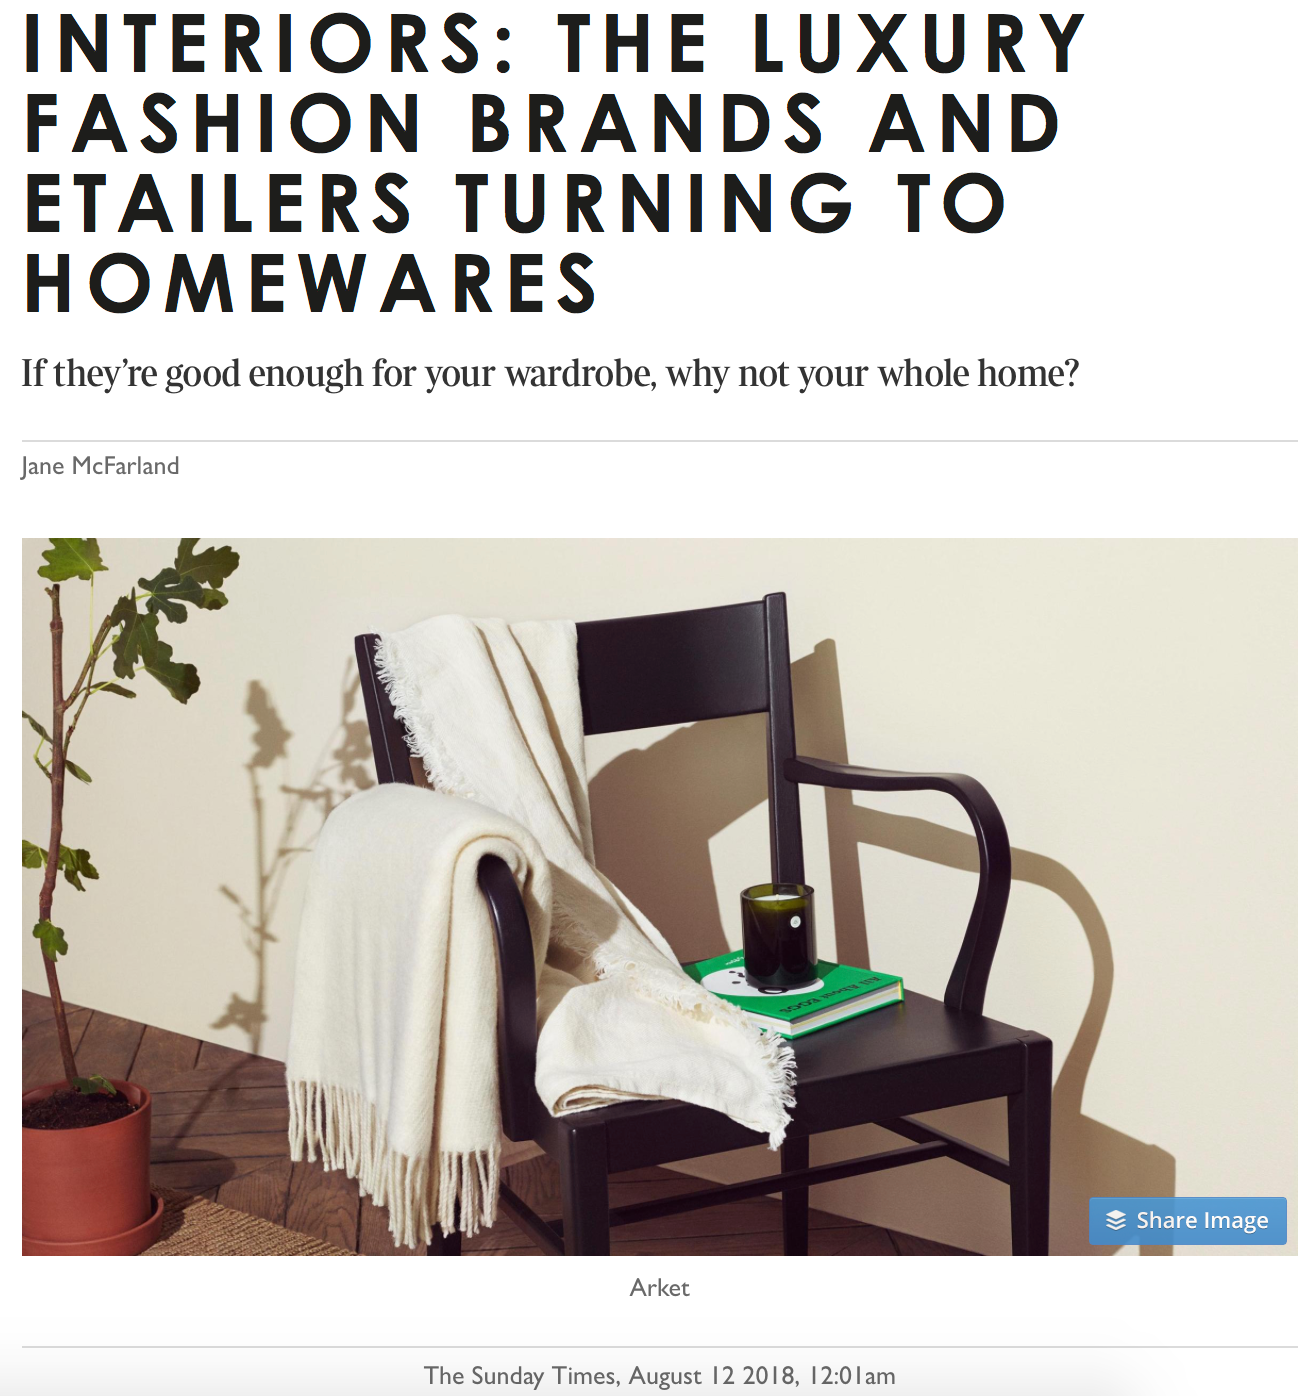 INTERIORS: THE LUXURY FASHION BRANDS AND ETAILERS TURNING TO HOMEWARES